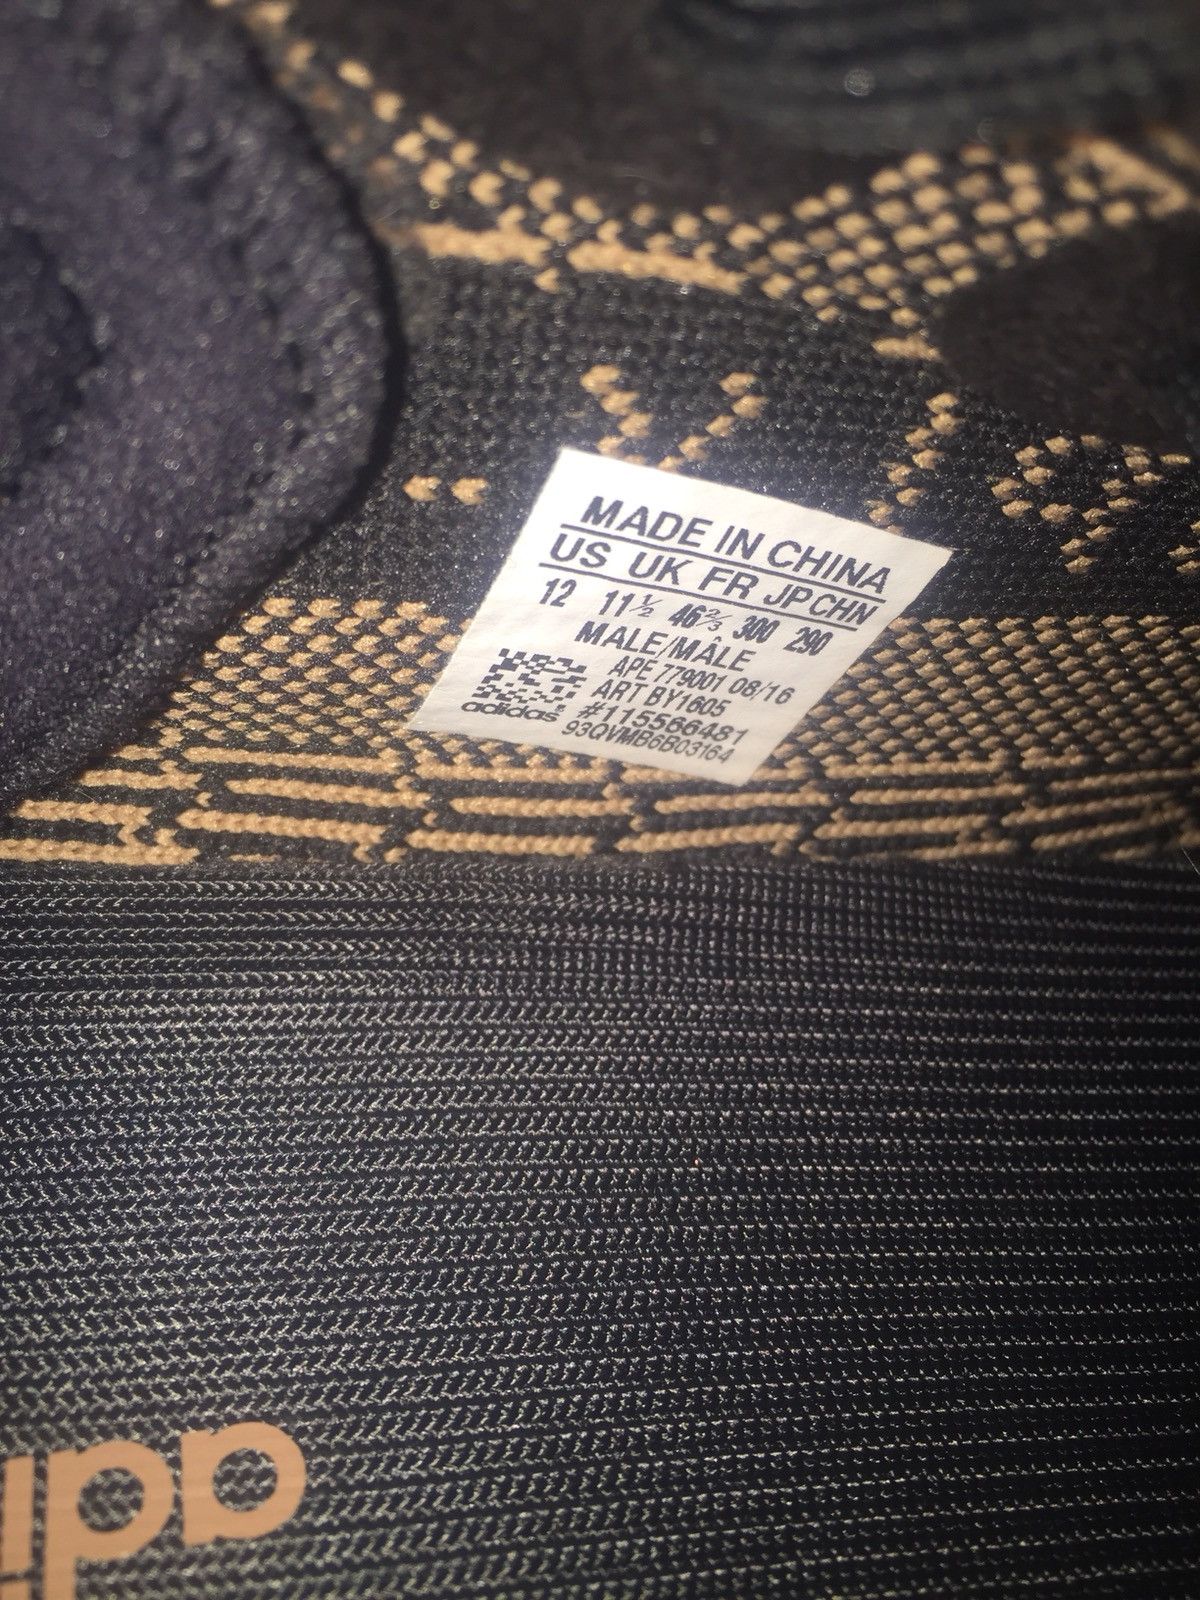 Adidas Yeezy 350 Boost V2 Copper Size US 12 / EU 45 - 8 Preview